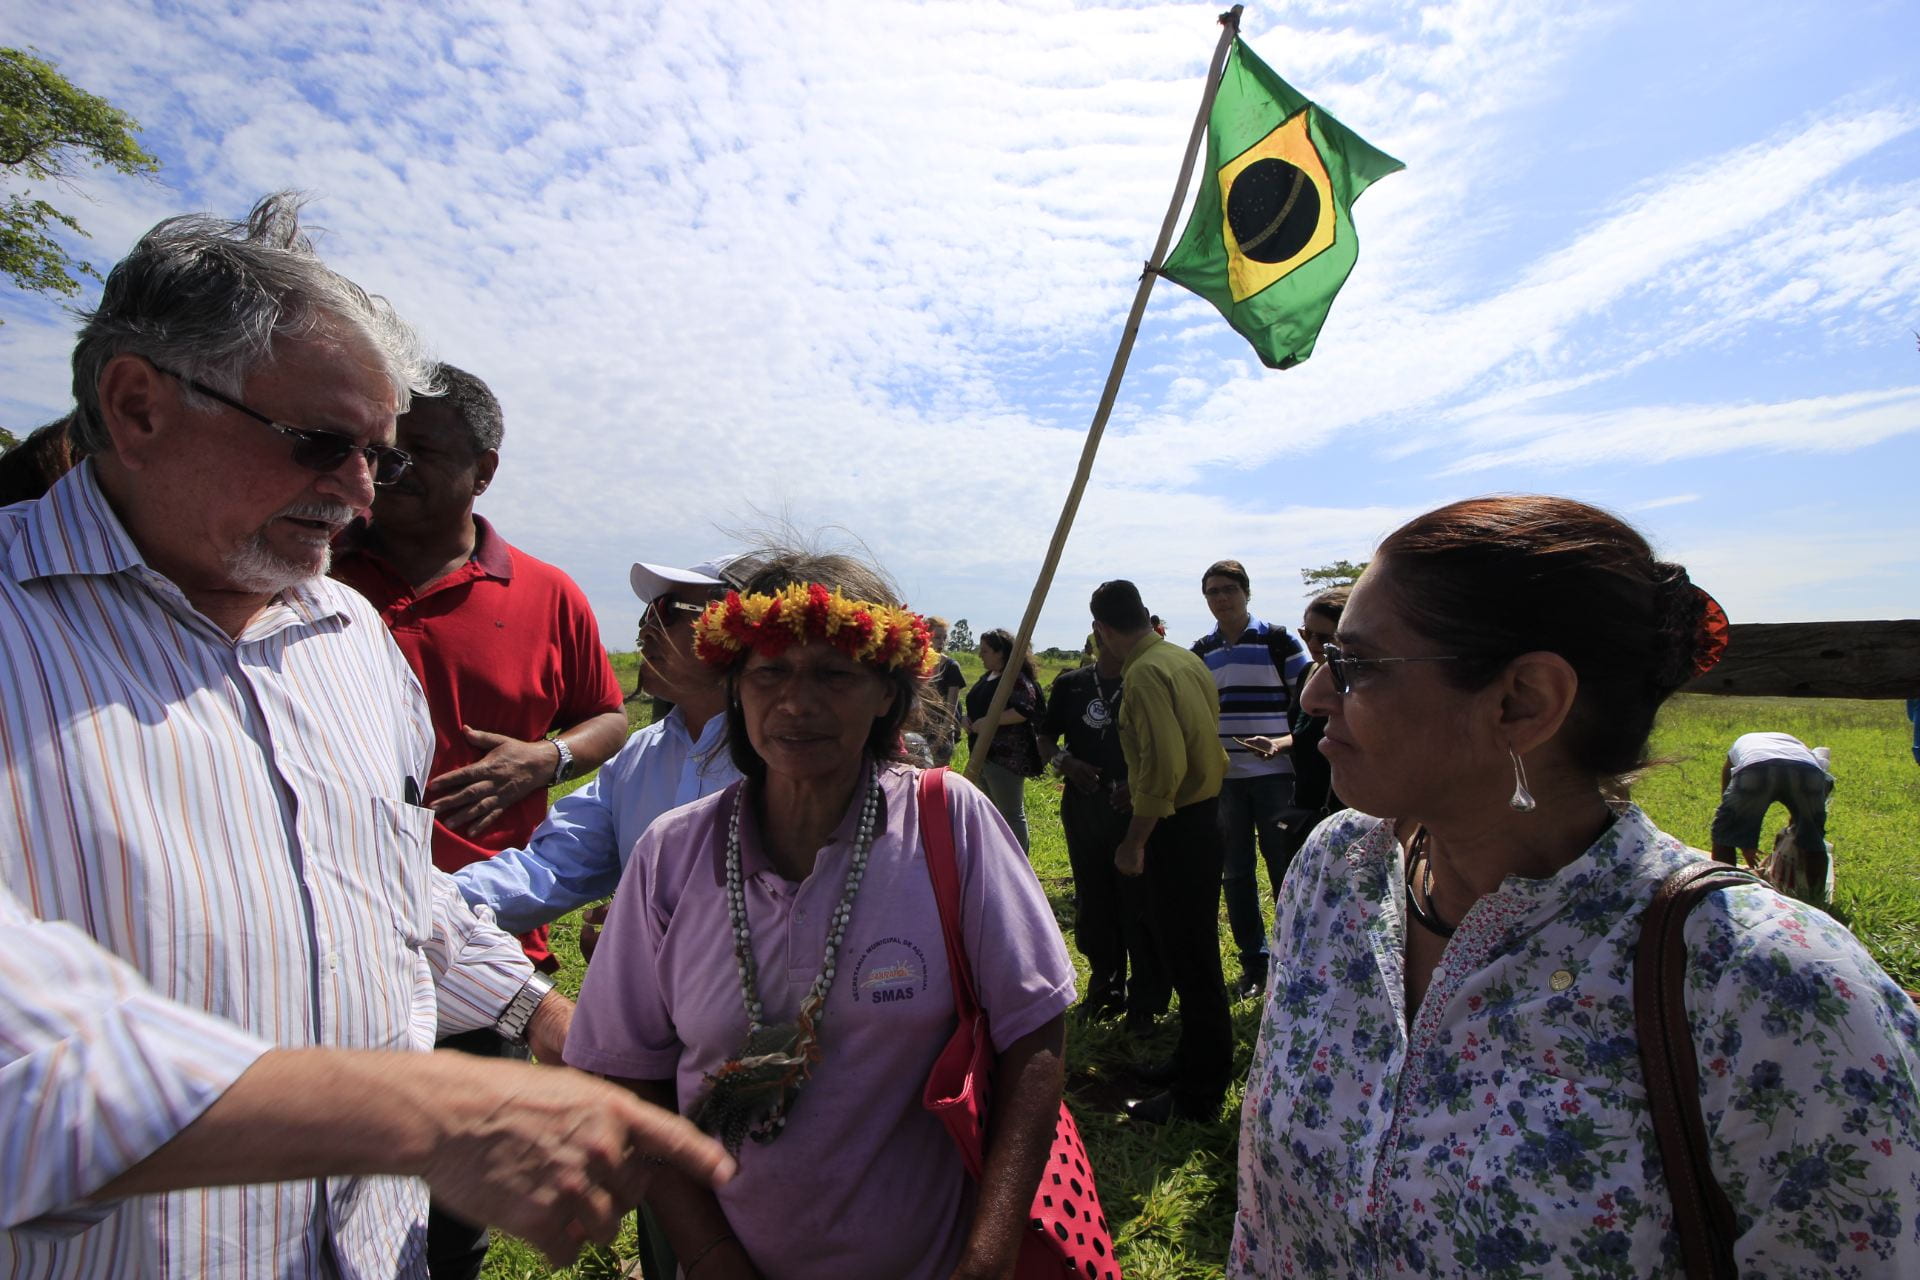 Image 1. Indigenous Representatives Speaking with Local Leaders in Brazil. Source Flickr.